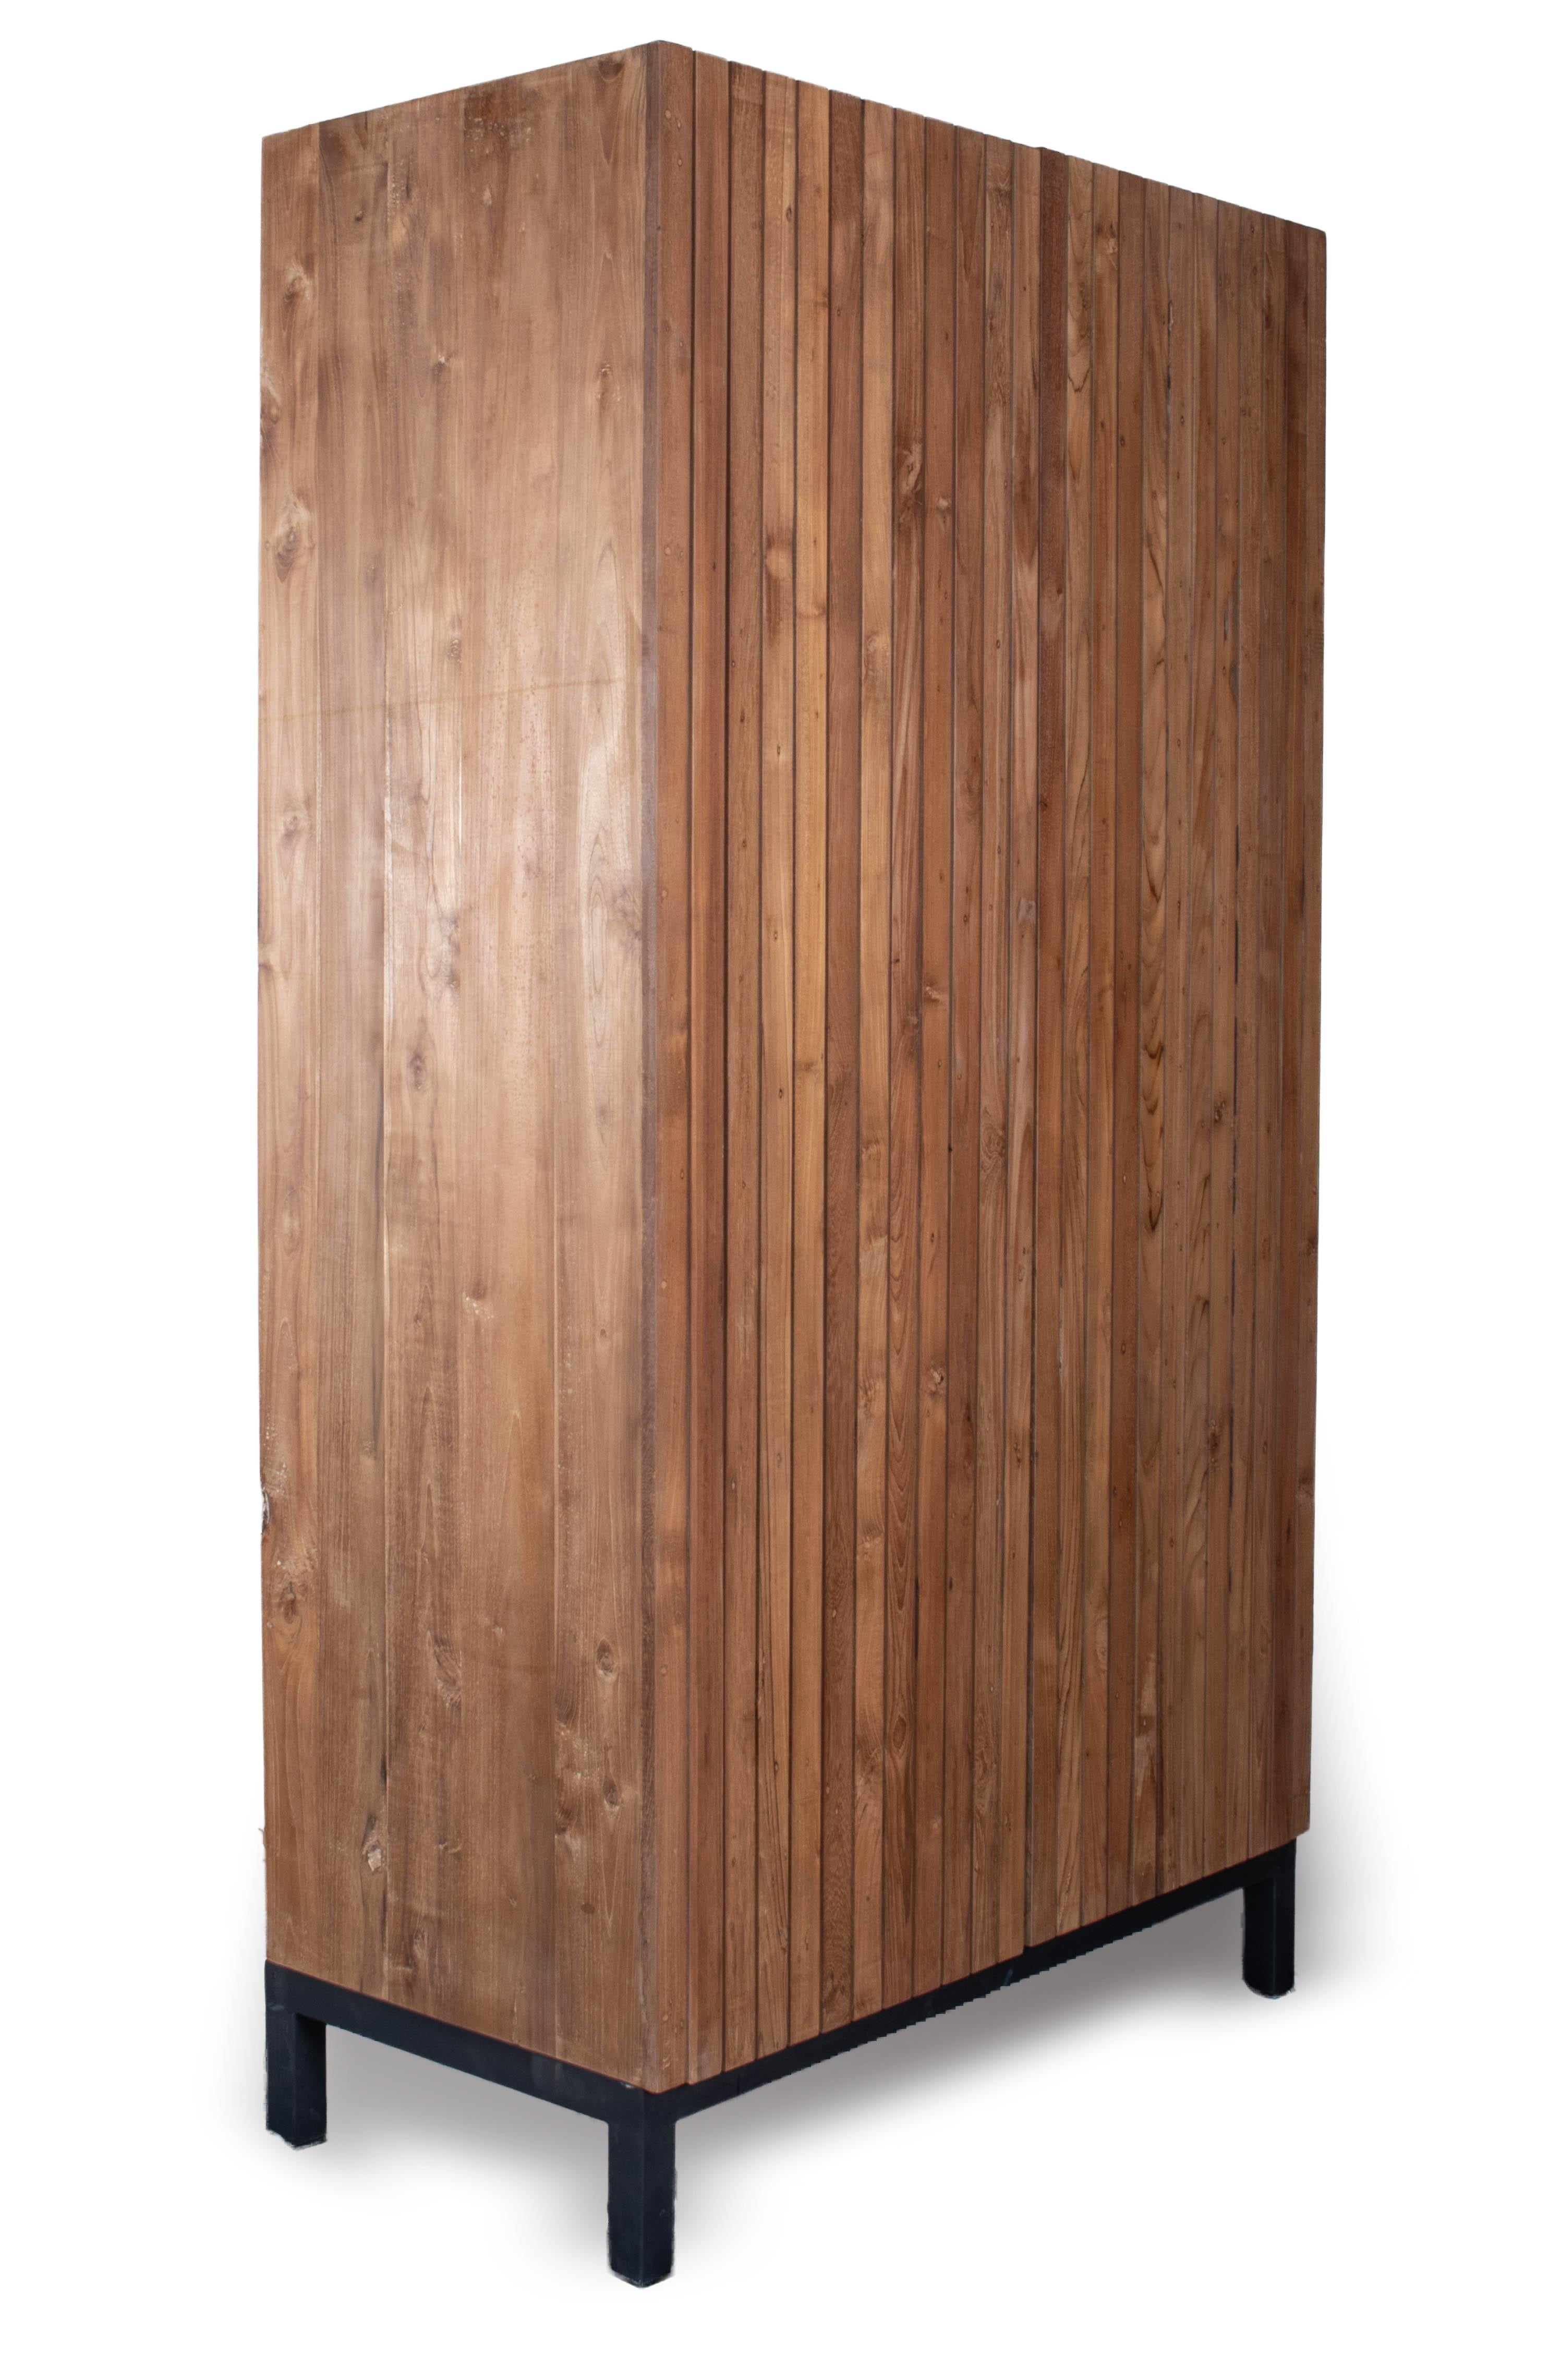 Add a touch of contemporary style to your home with this two-door slat cabinet. The elm wood construction and simple design make this piece a perfect addition to any room, while the versatile interior allows you to reconfigure the storage to meet